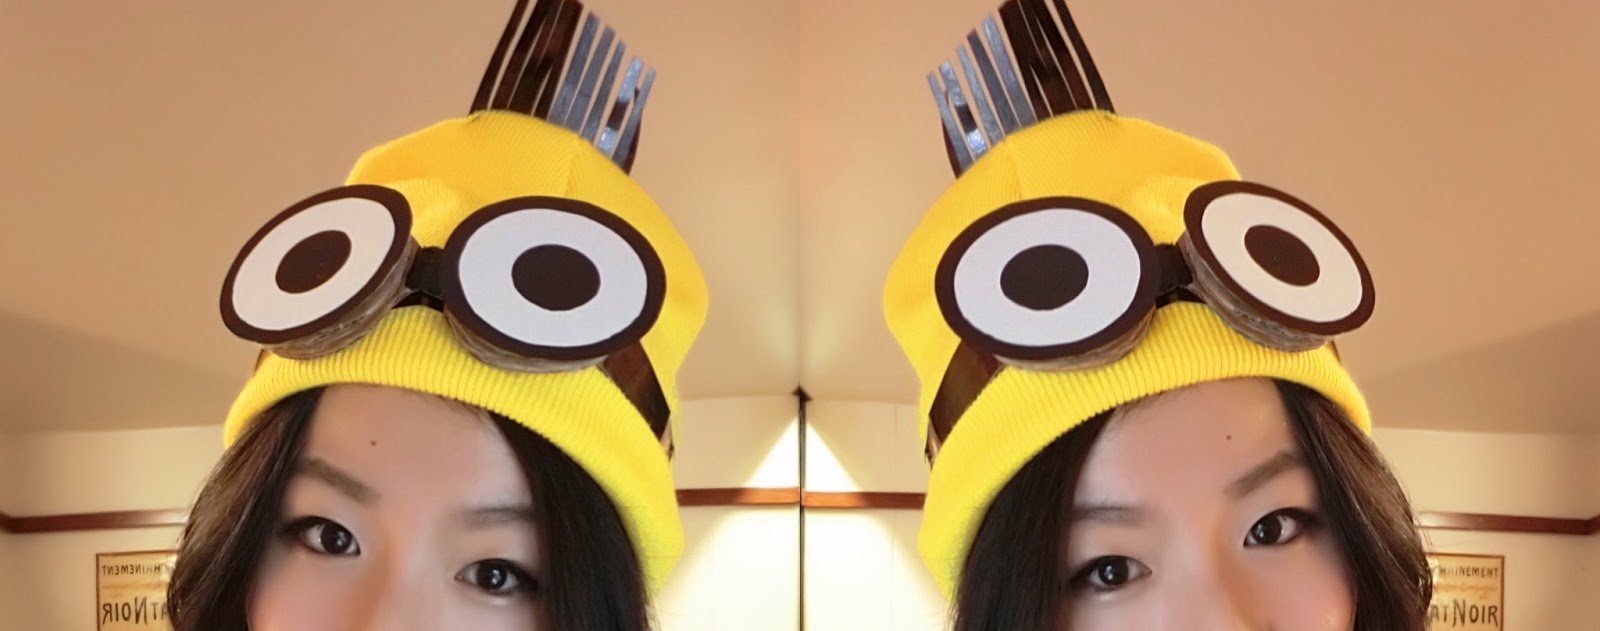 DIY Minion Costume- Halloween outfit 